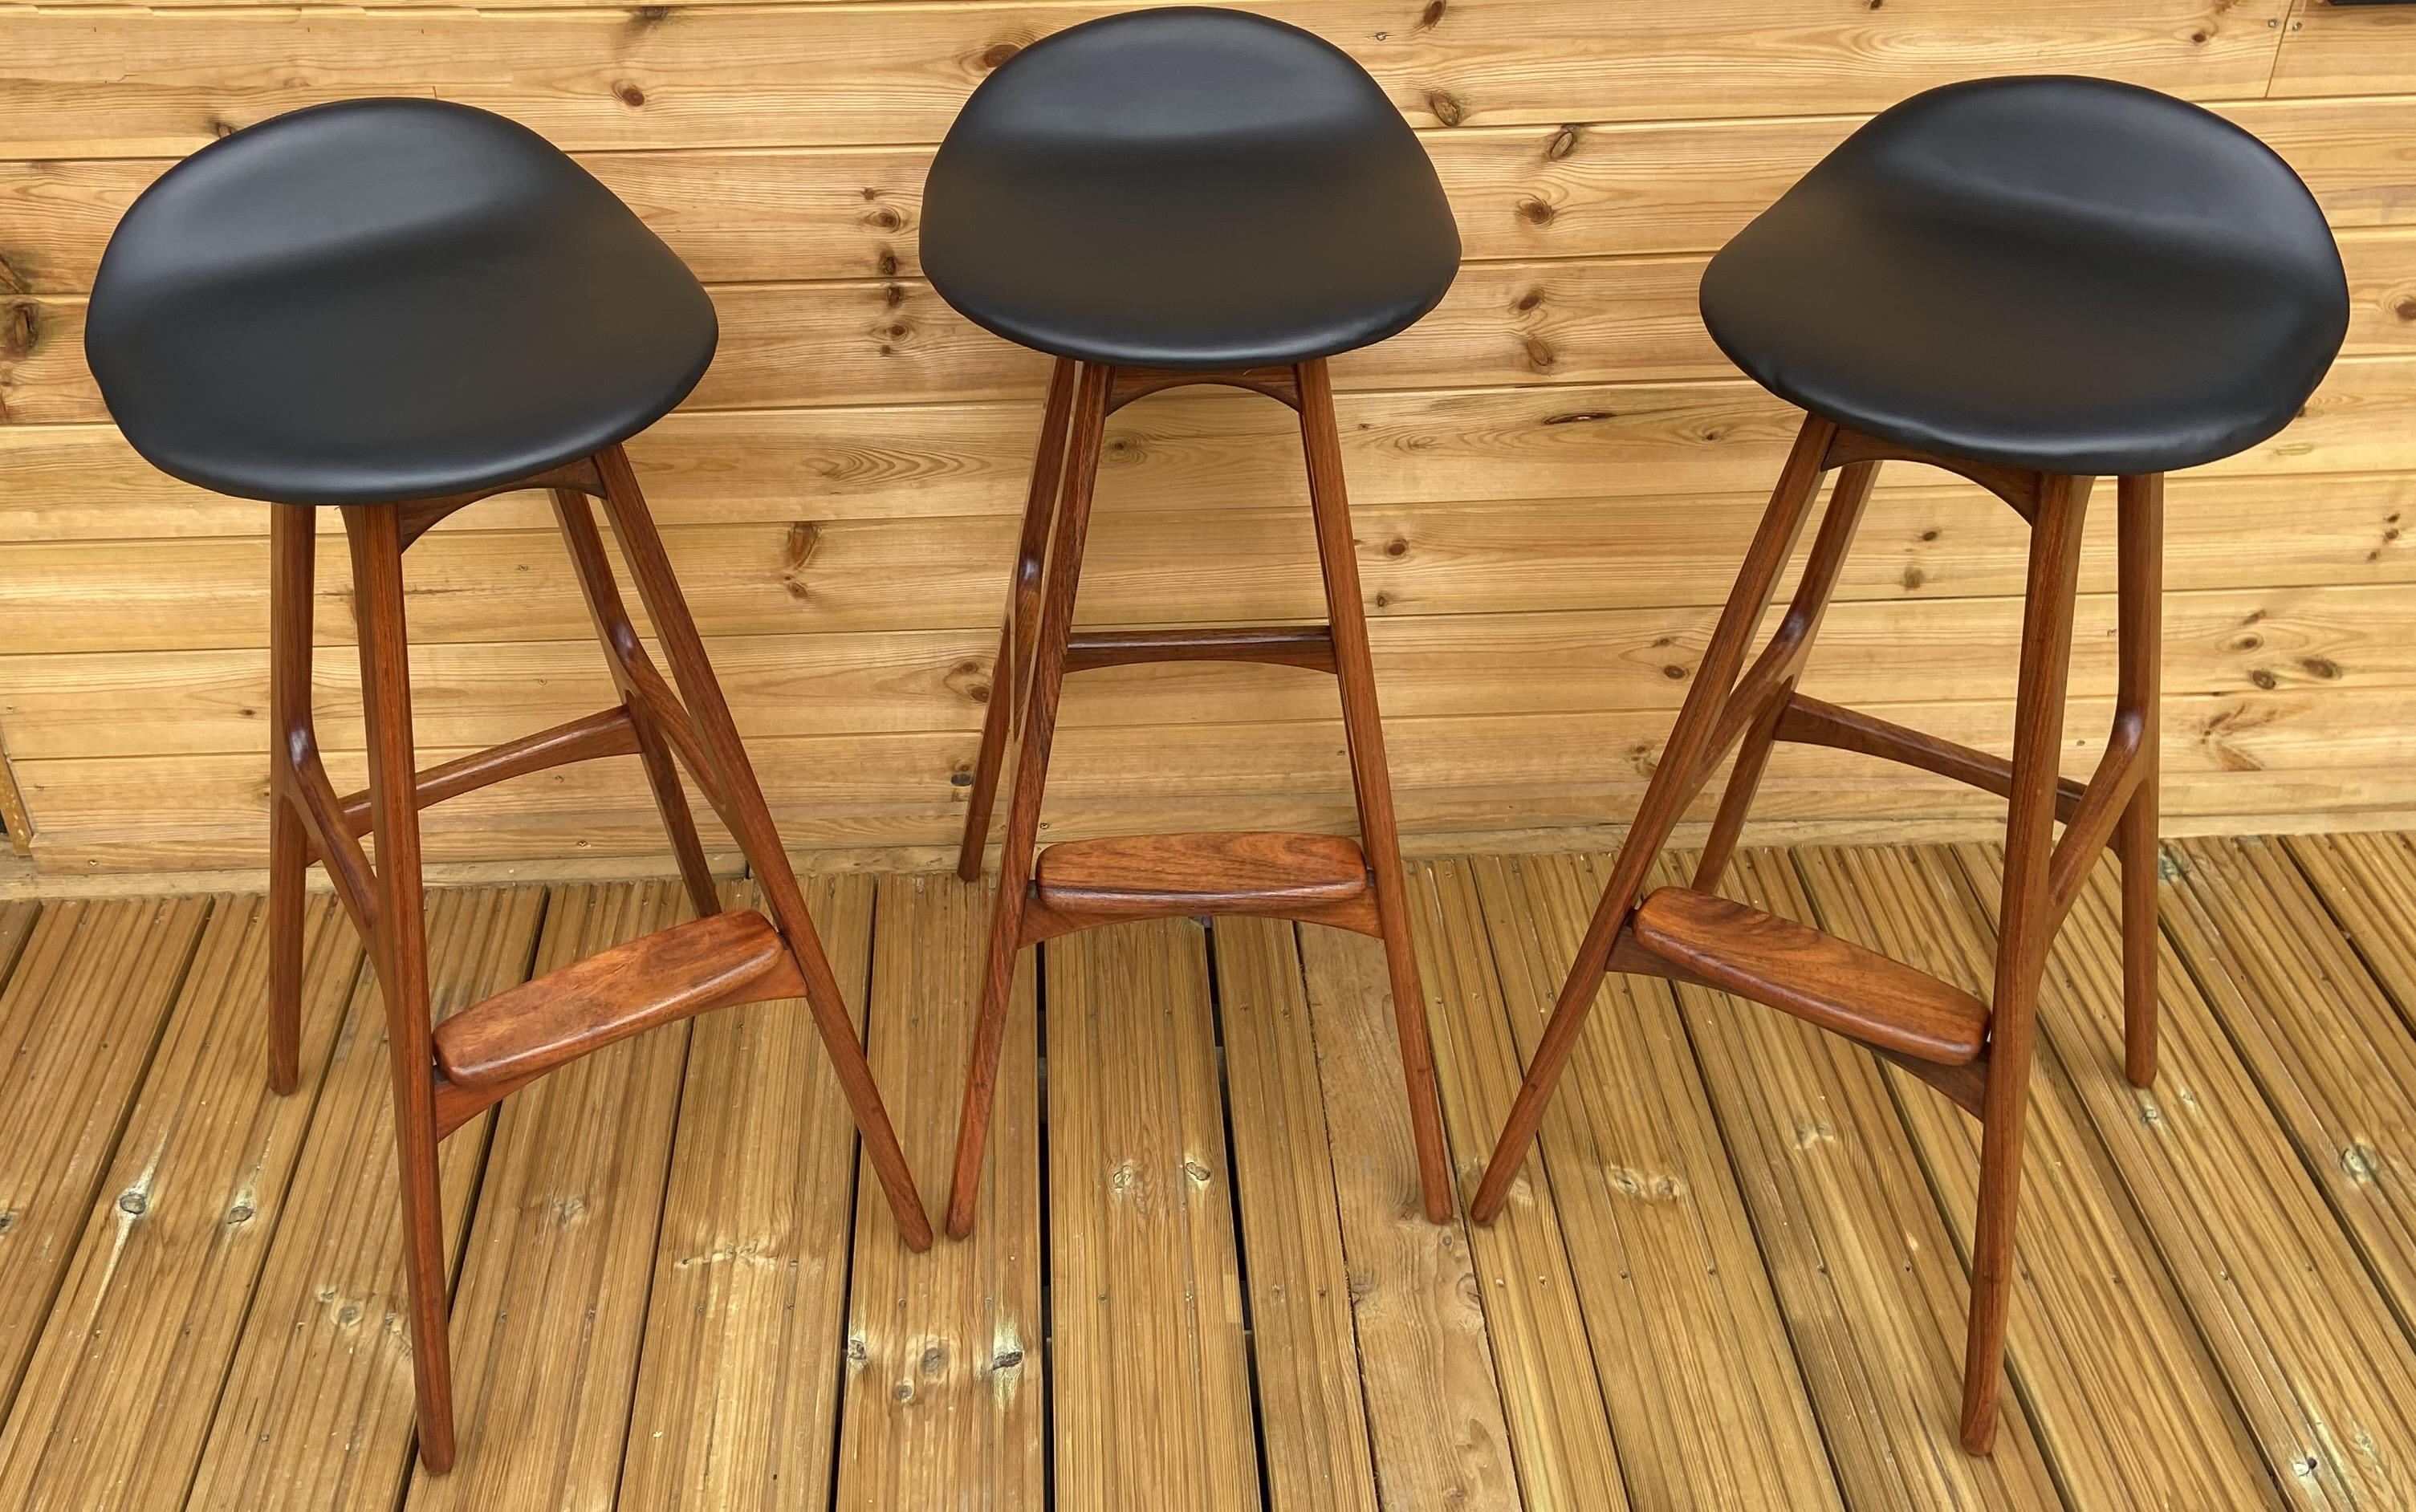 This is a really good original set of this Classic design of barstools by Erik Buch, or Erik Buck depending where you look!
The timber has a lovely patina and the black leather seats are in very good condition.
These are made from solid Santos